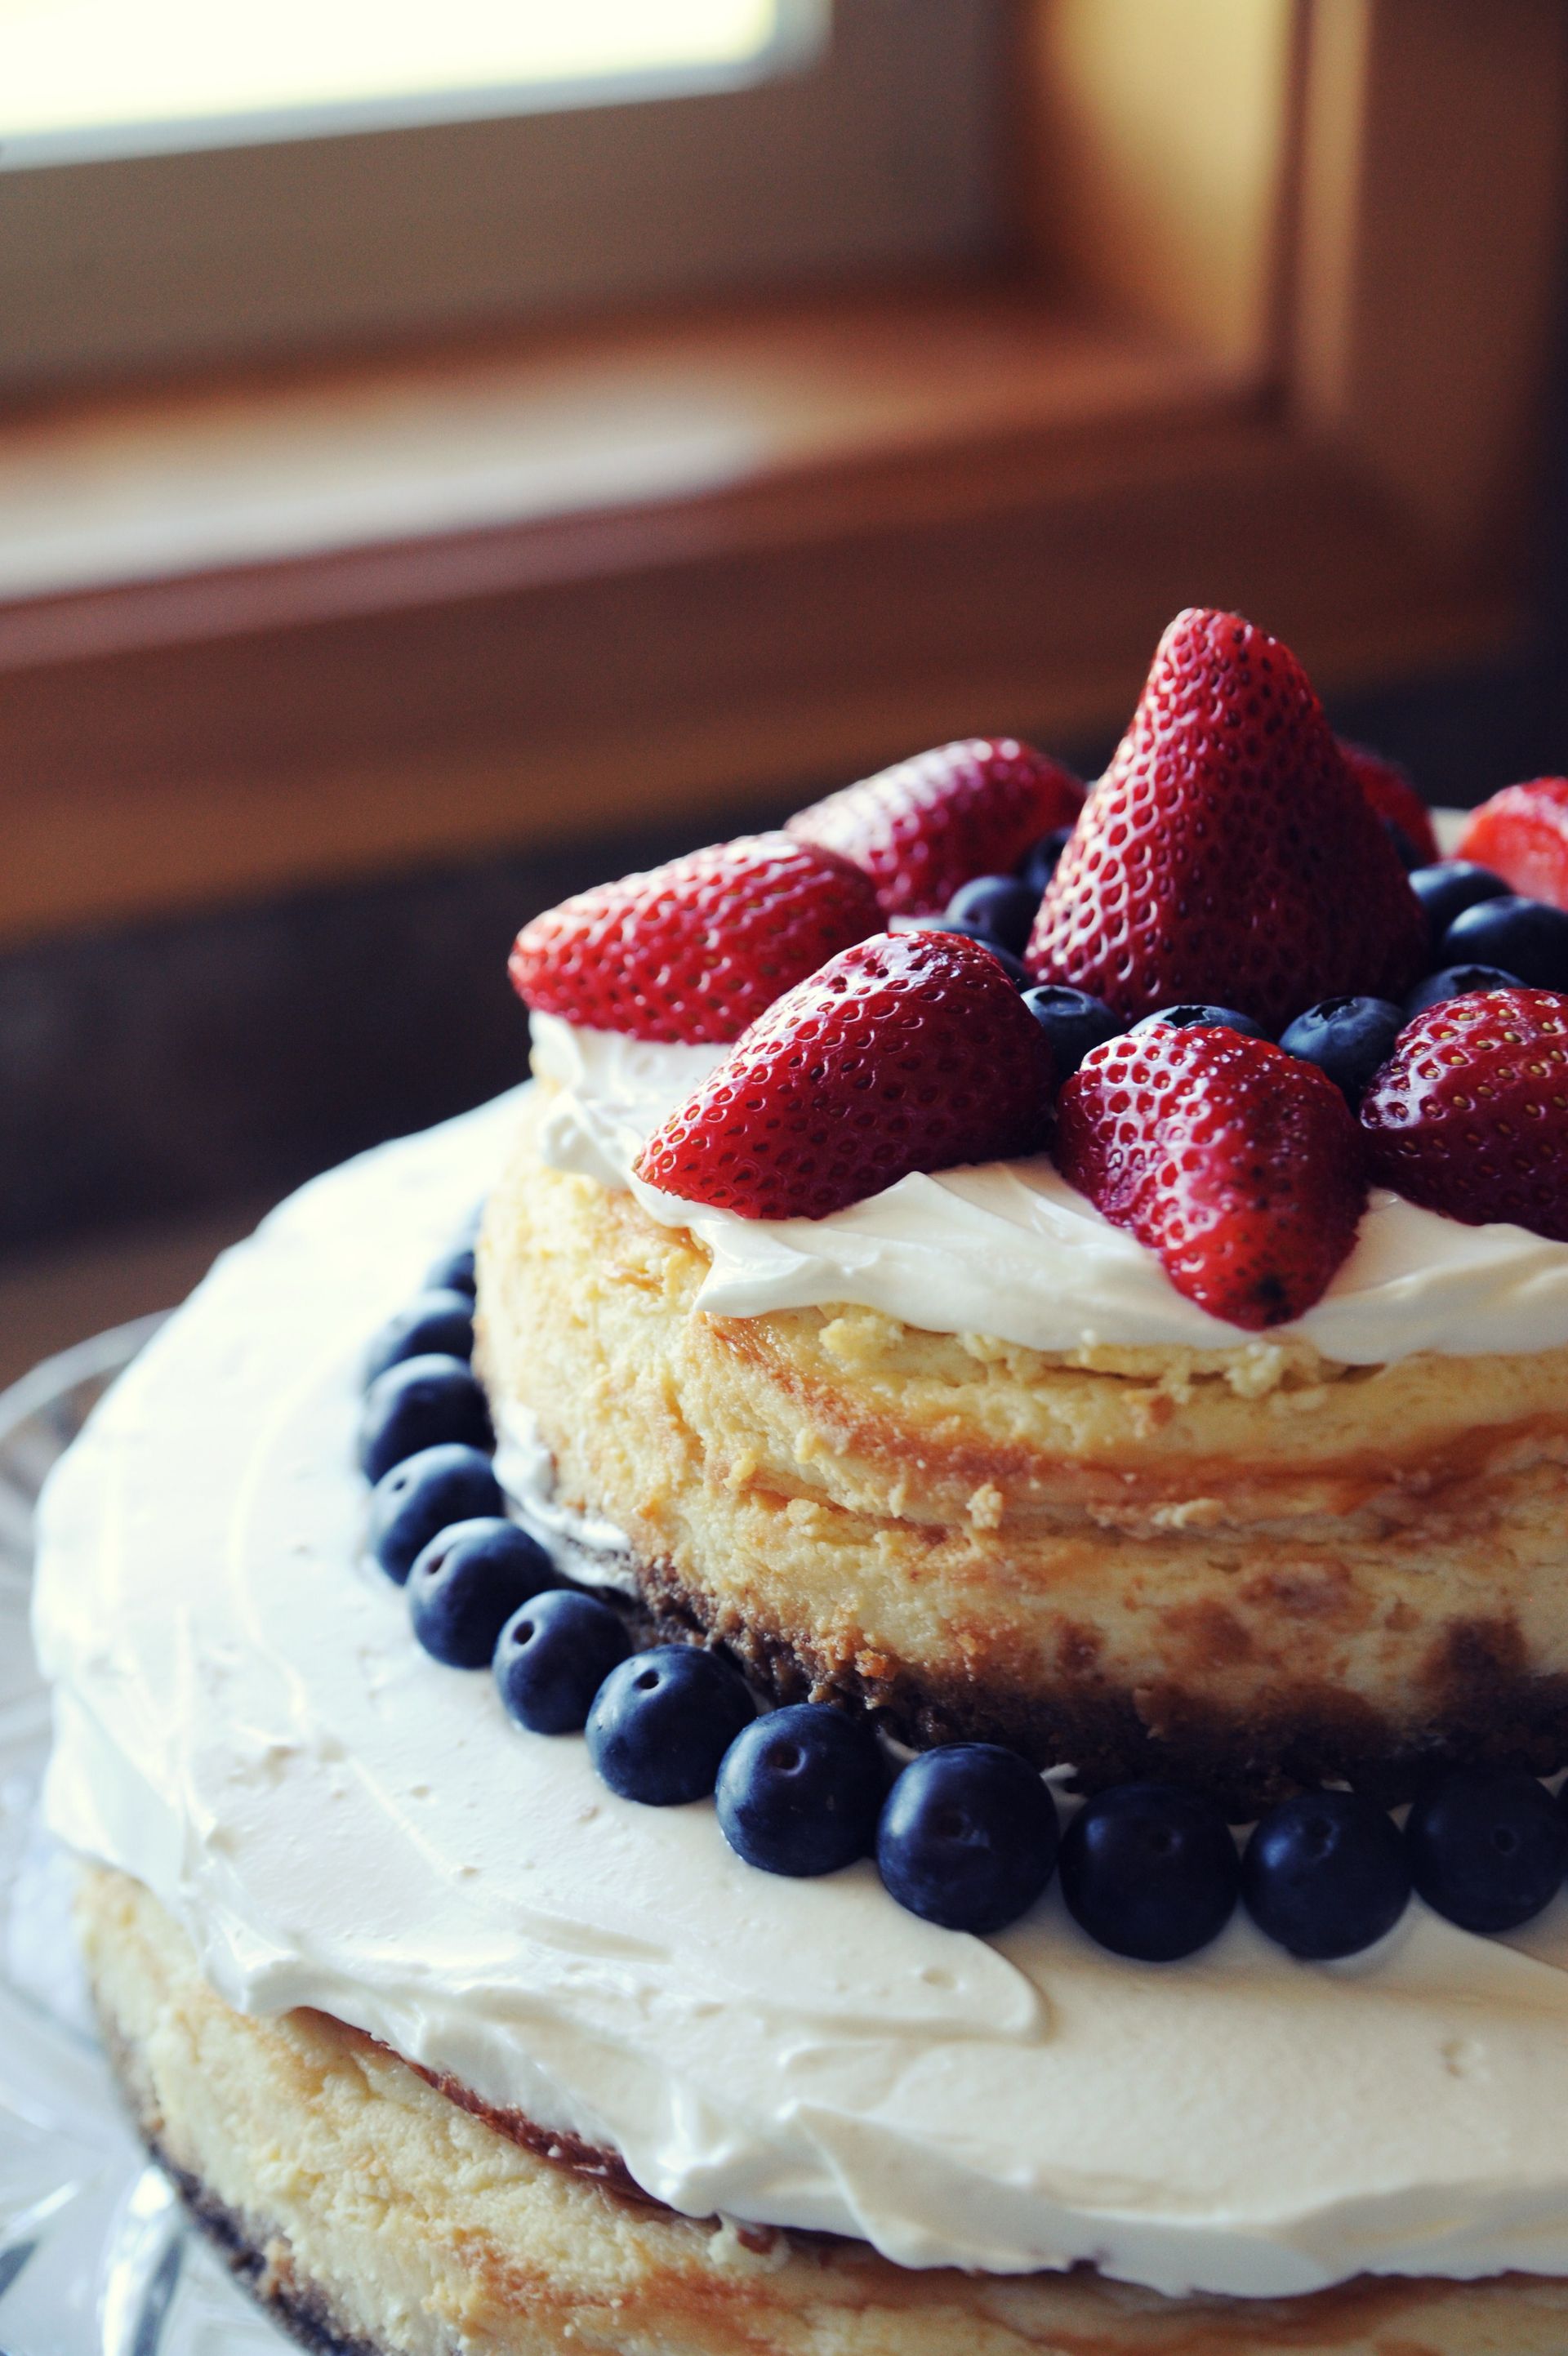 A cake with berries and cream on top.